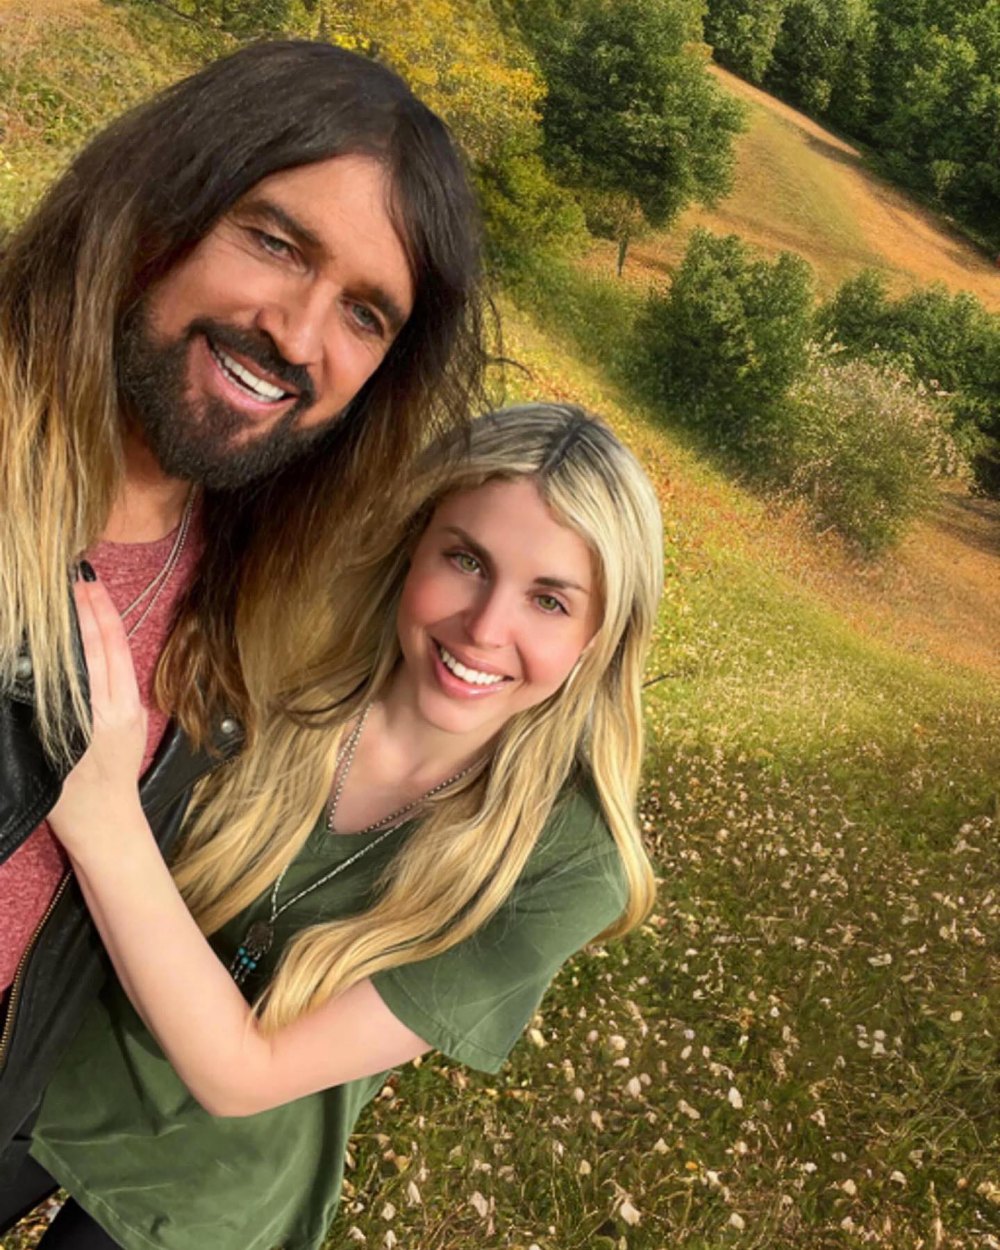 Firerose Accuses Spouse Billy Ray Cyrus of Domestic Abuse in New Divorce Filing 620